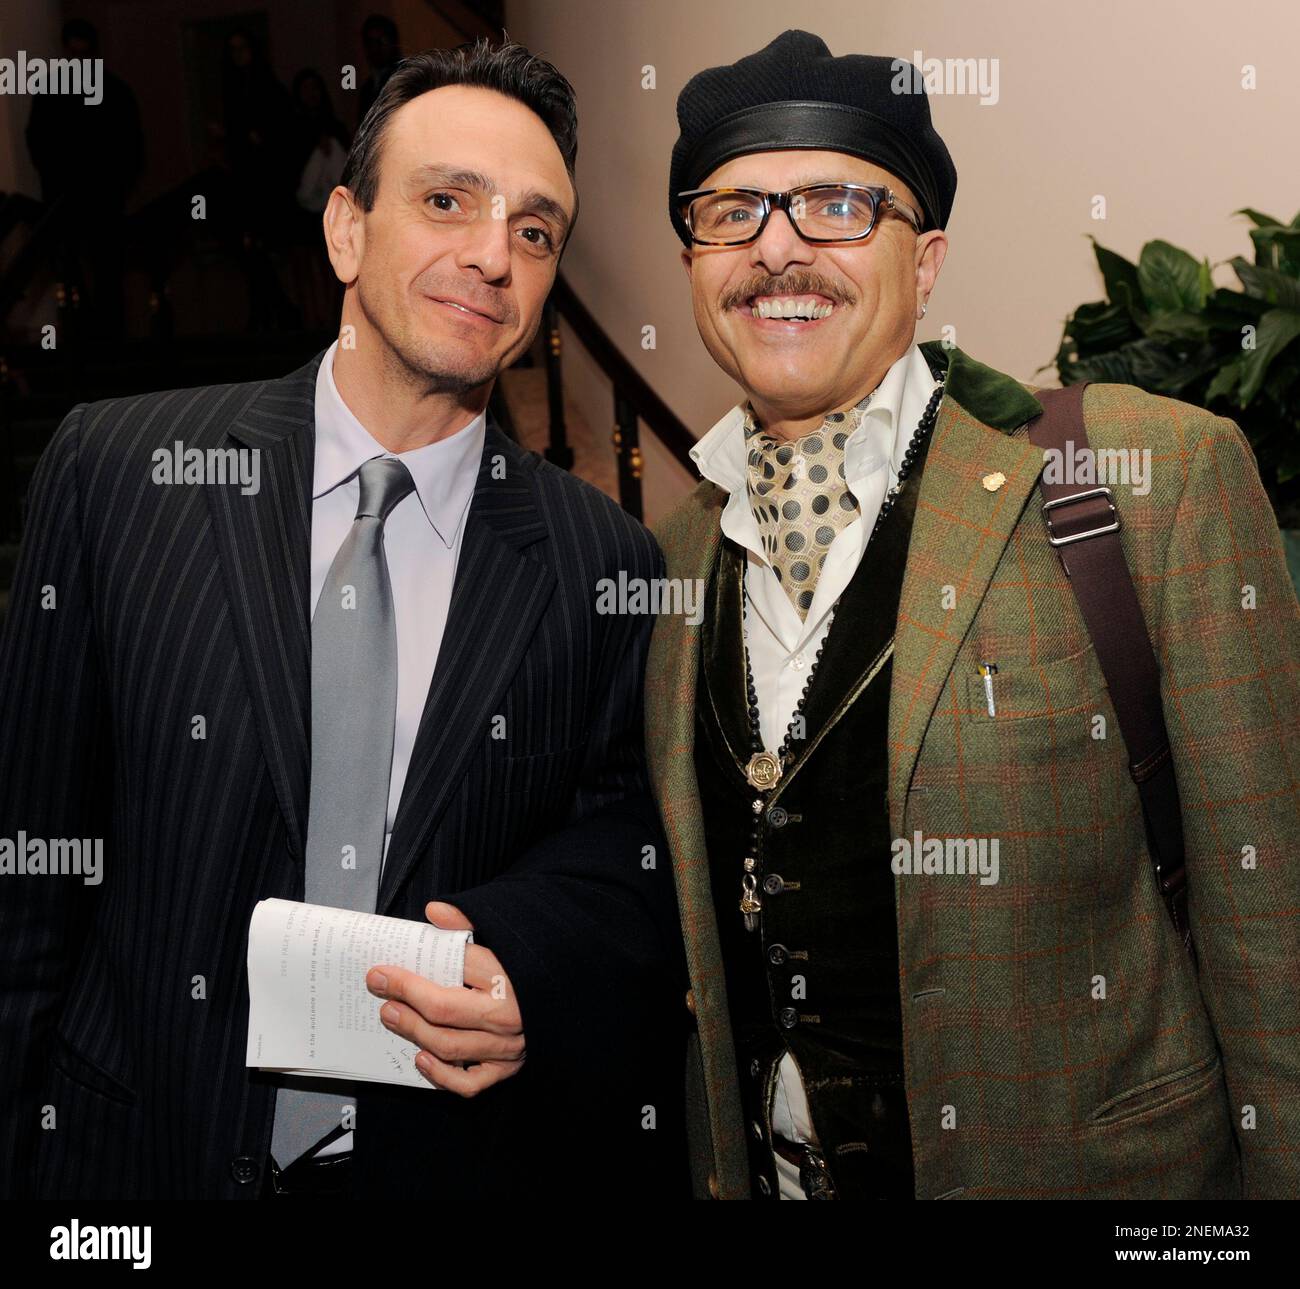 Hank Azaria, left, a voice artist on the animated series "The Simpsons," poses with actor Joe Pantoliano at a gala to honor the show by The Paley Center for Media, Tuesday, Dec. 8, 2009 in Beverly Hills, Calif. (AP Photo/Chris Pizzello) Stock Photo